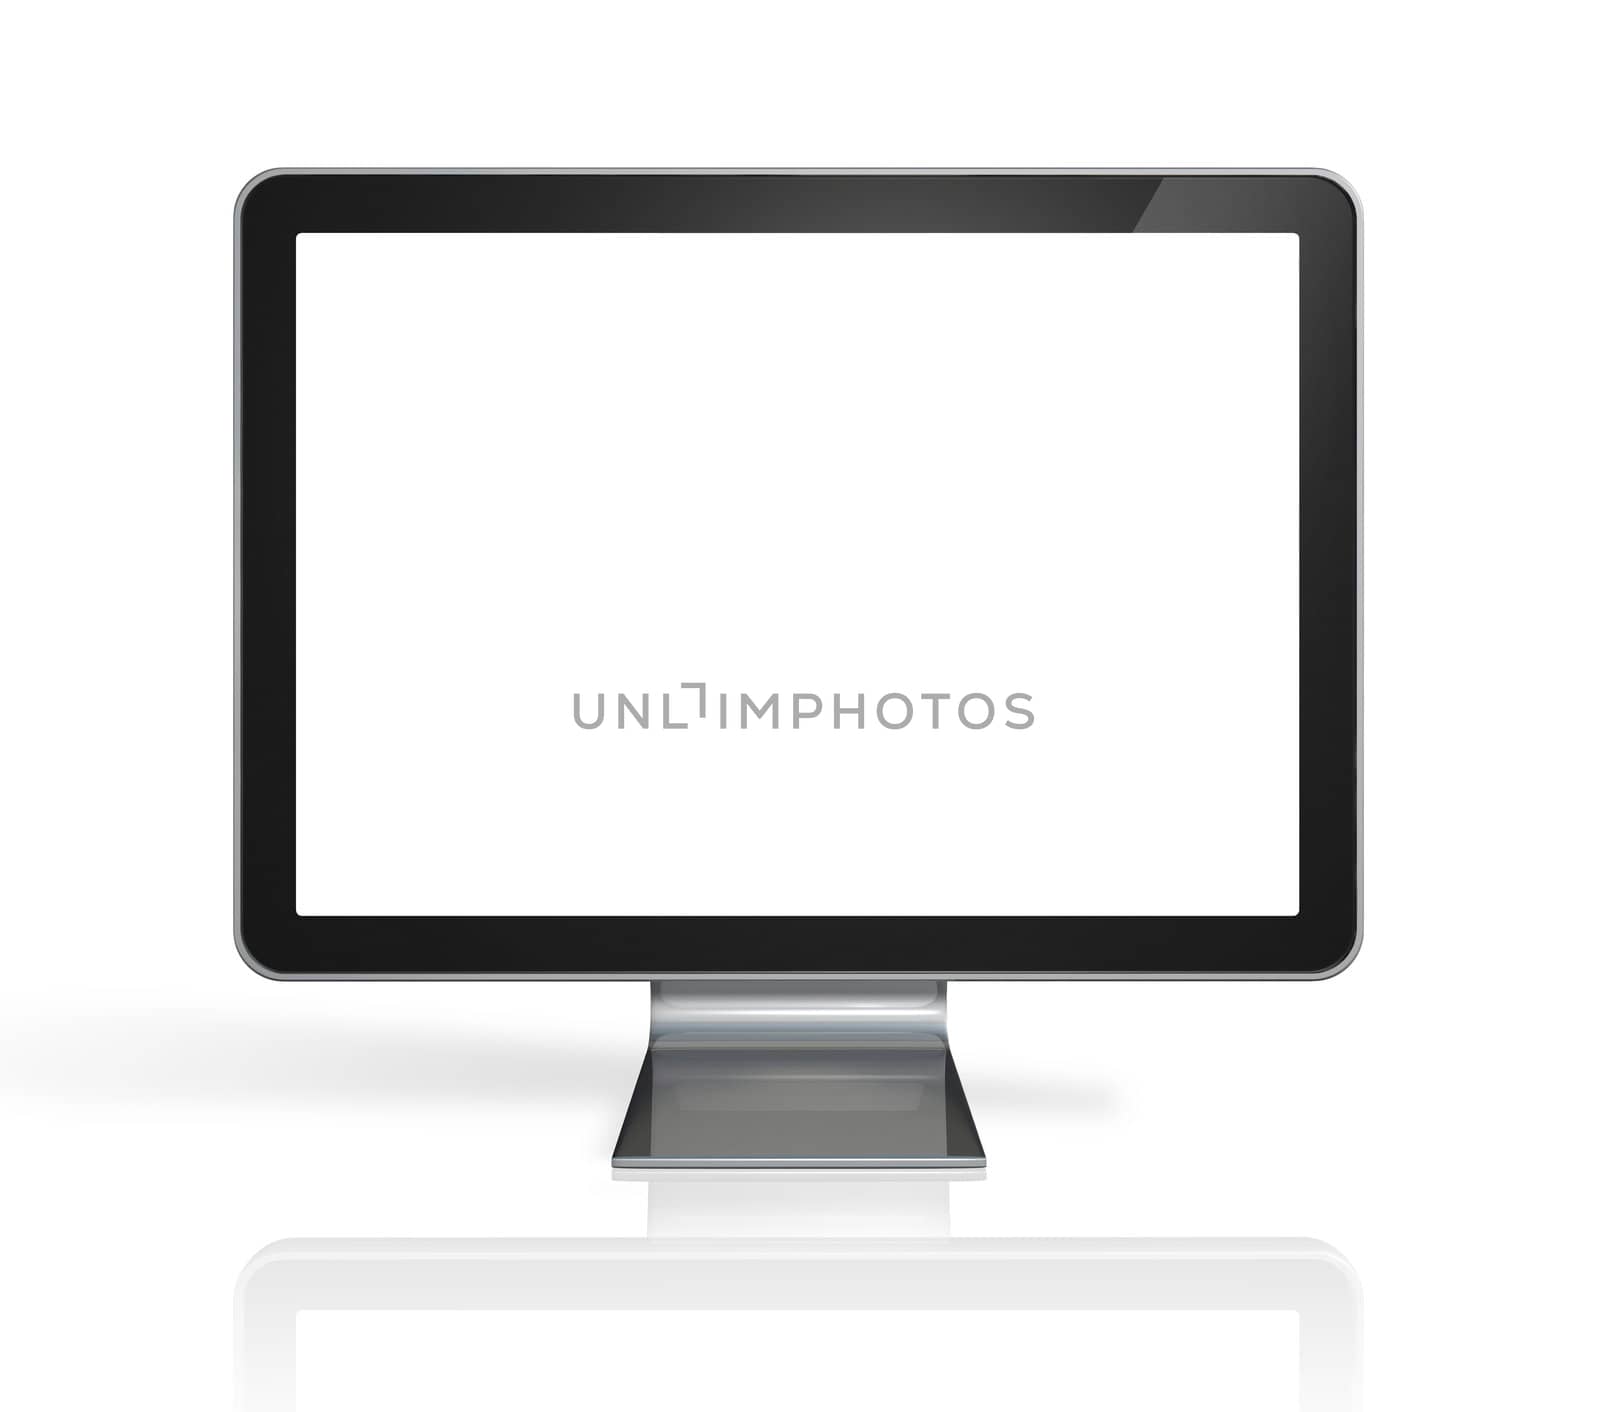 3D television, computer screen isolated on white whith clipping path